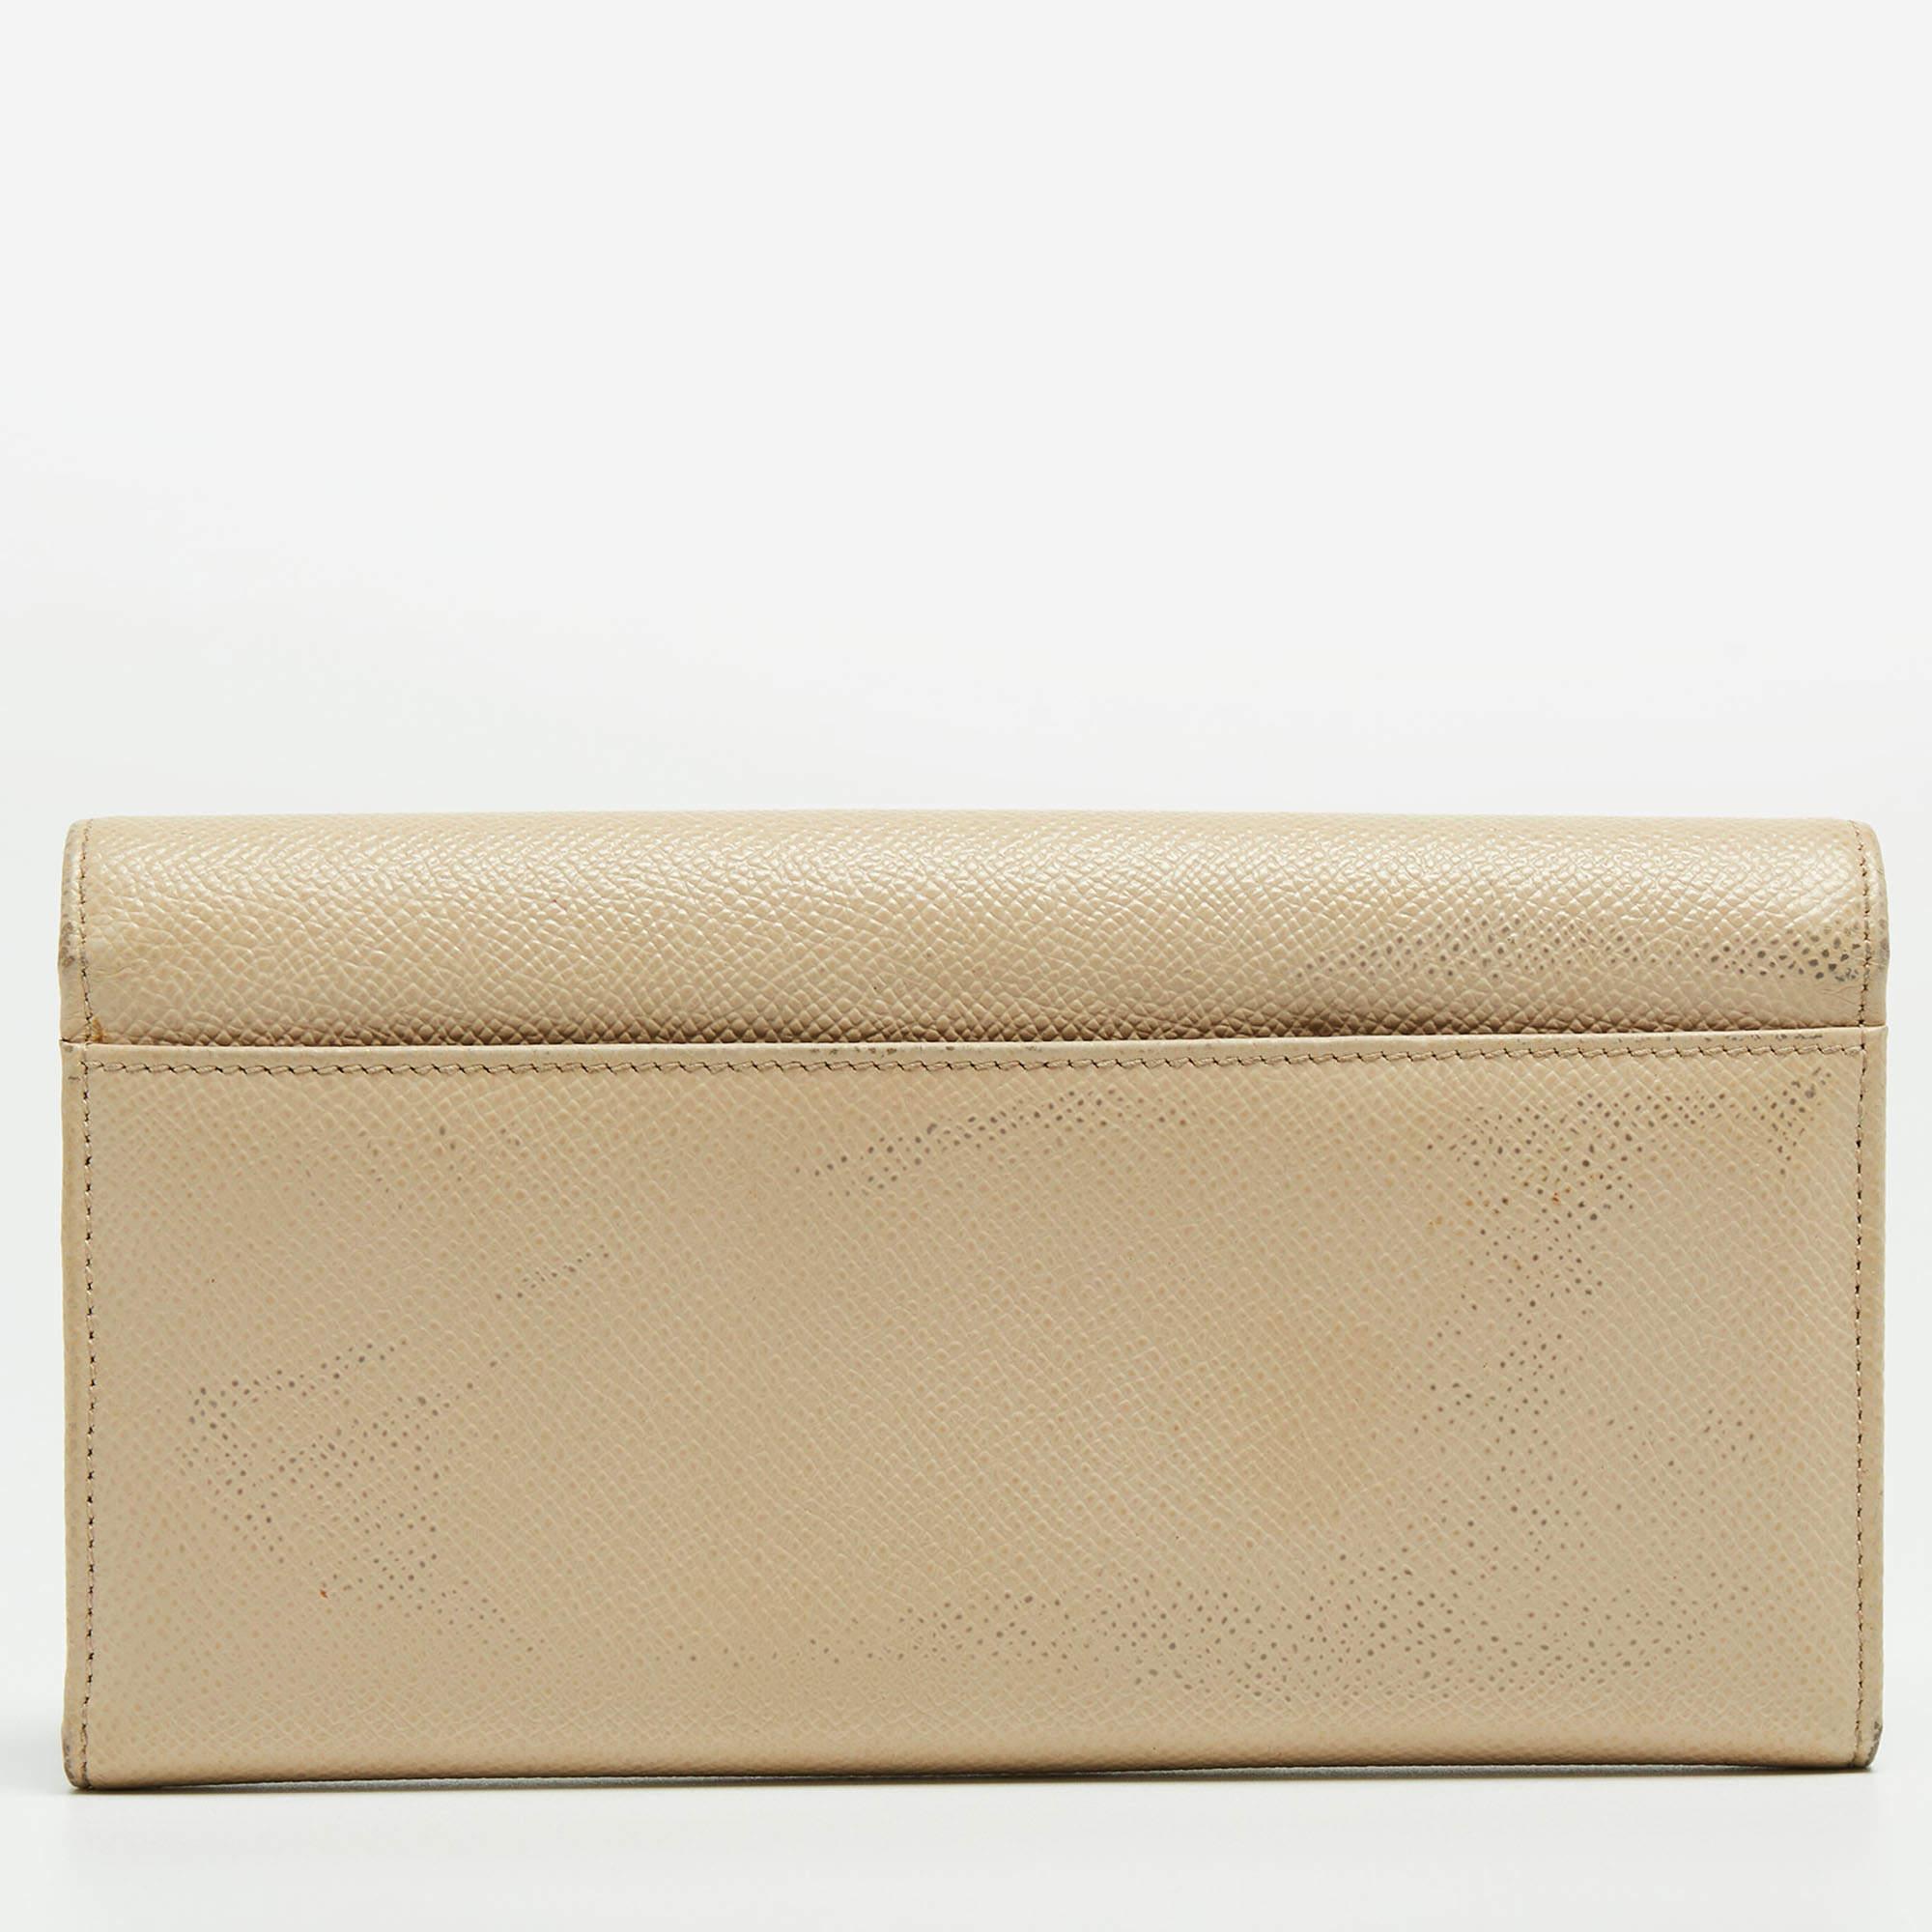 Dolce & Gabbana Beige Leather Dauphine Flap Continental Wallet For Sale 4